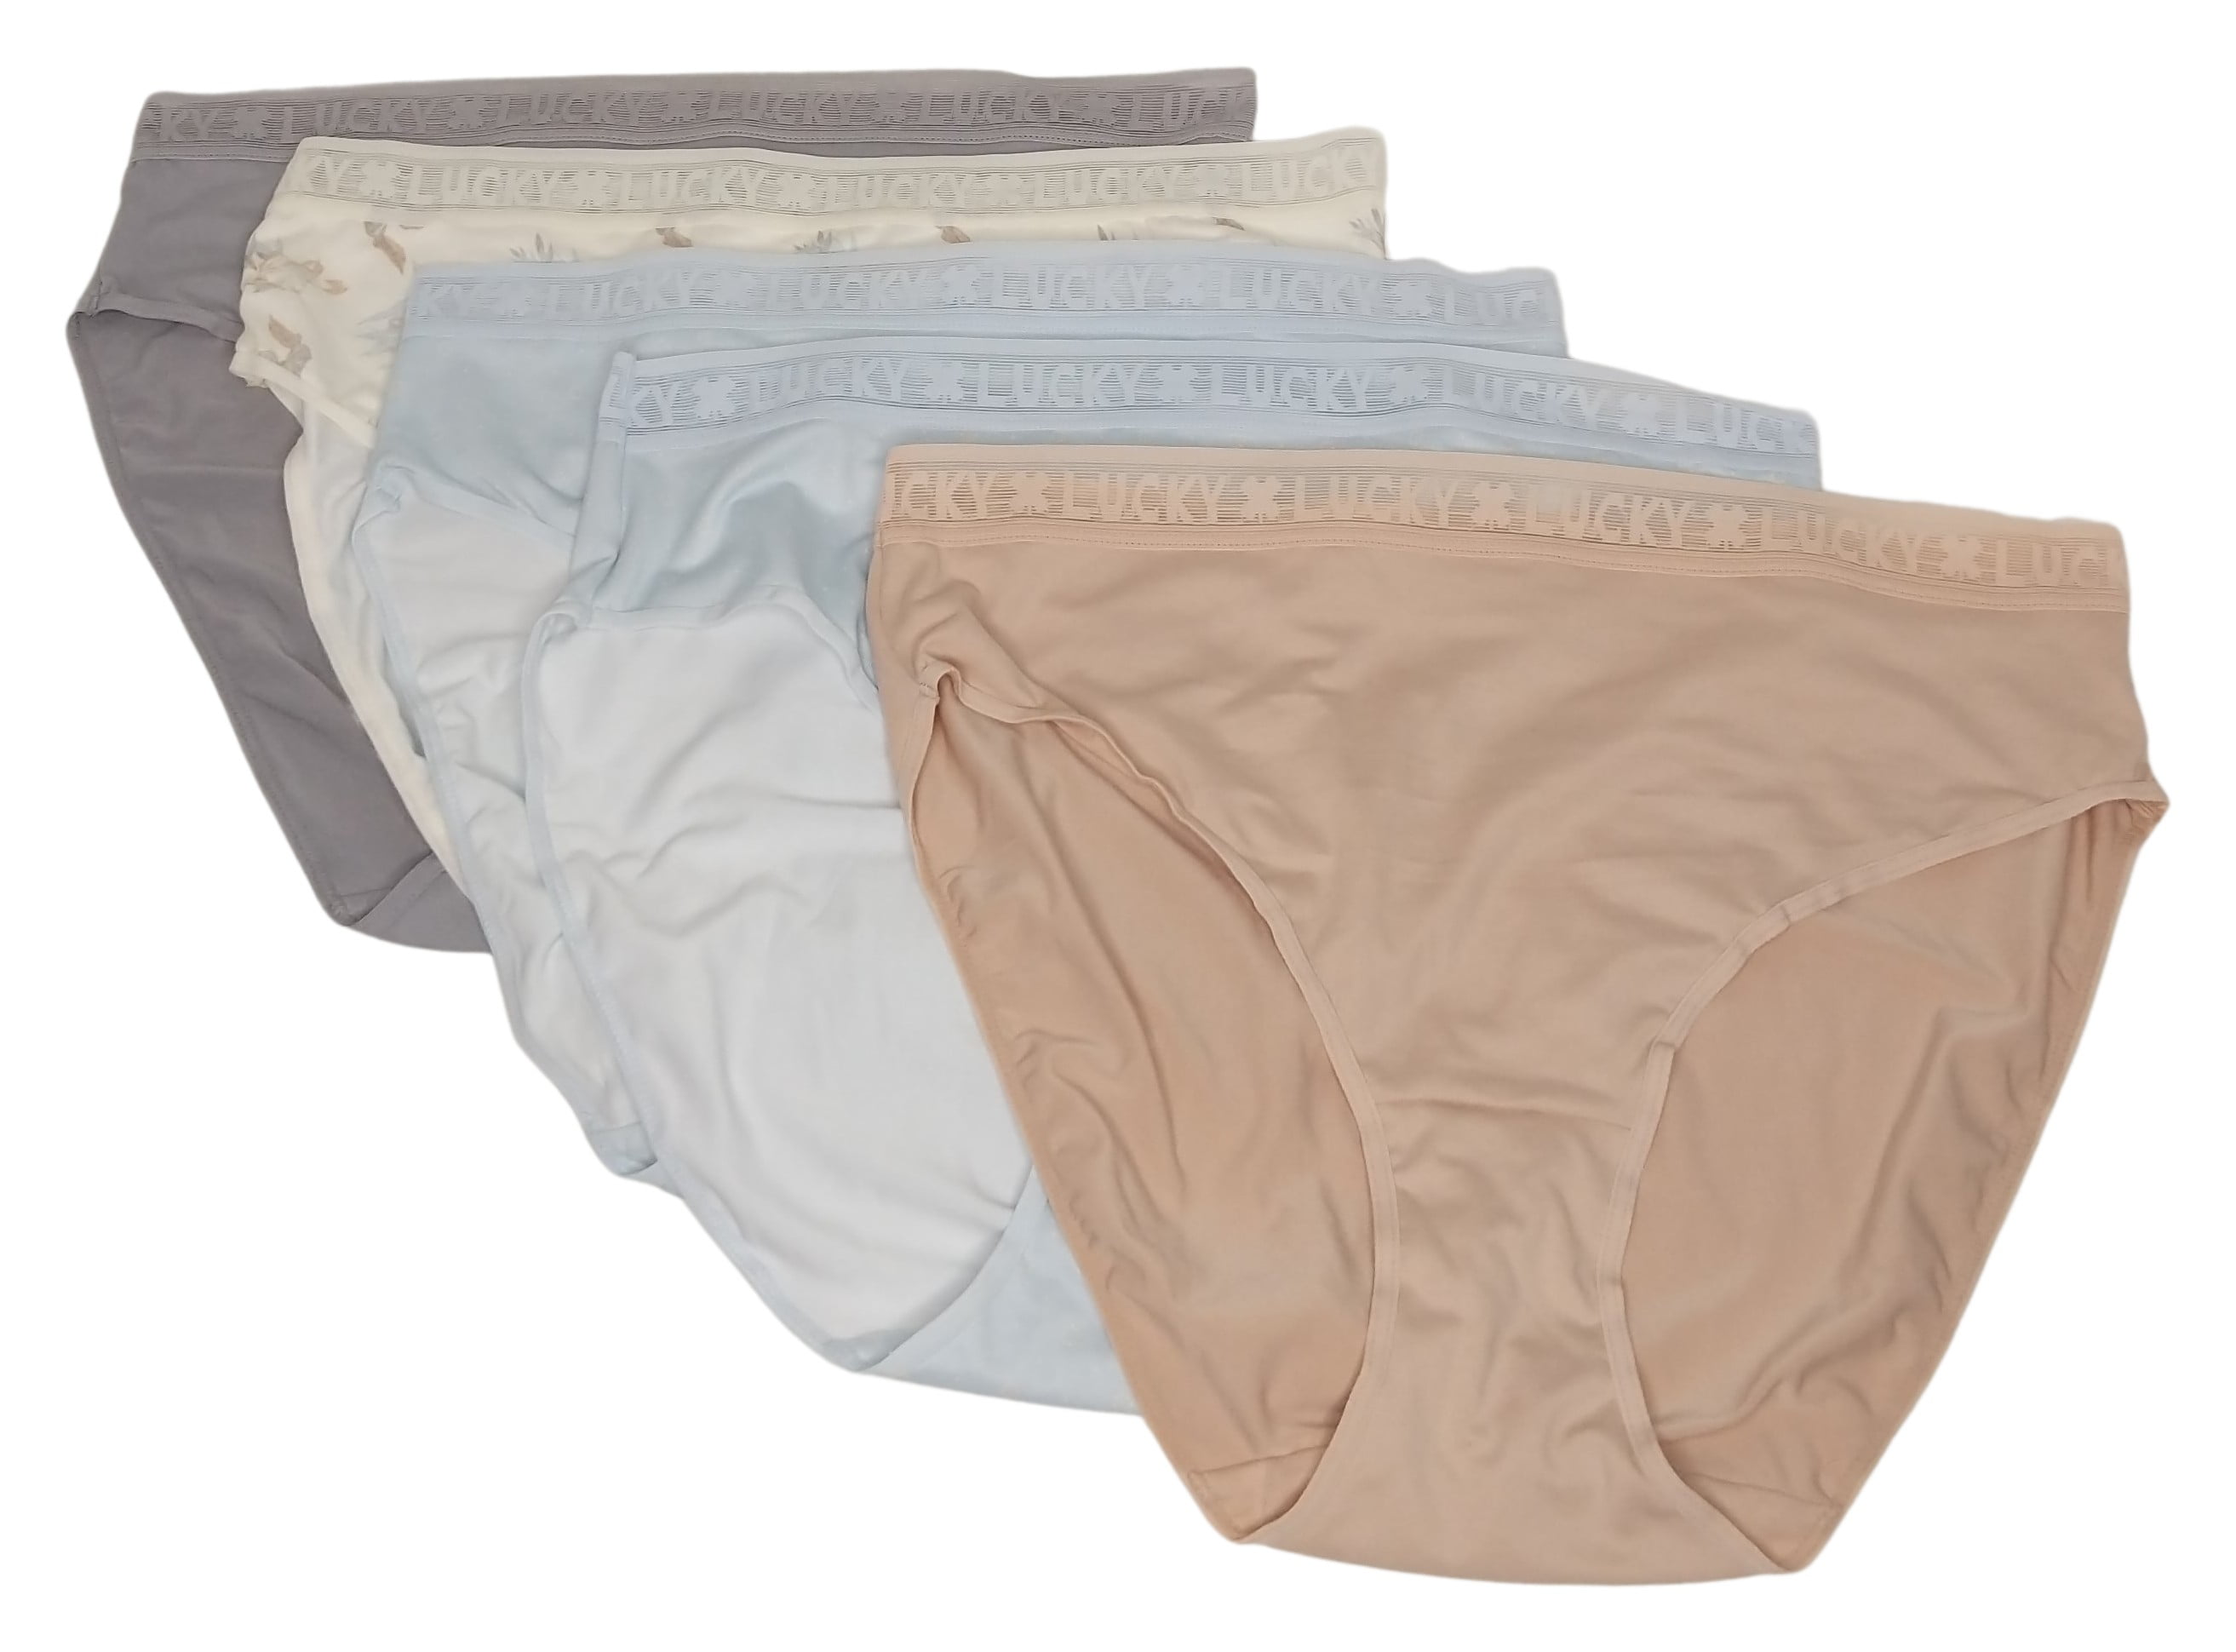 Lucky Brand Women's Hi Cut 5 Pack Ultra Soft Full Coverage Panties Multi  Size S